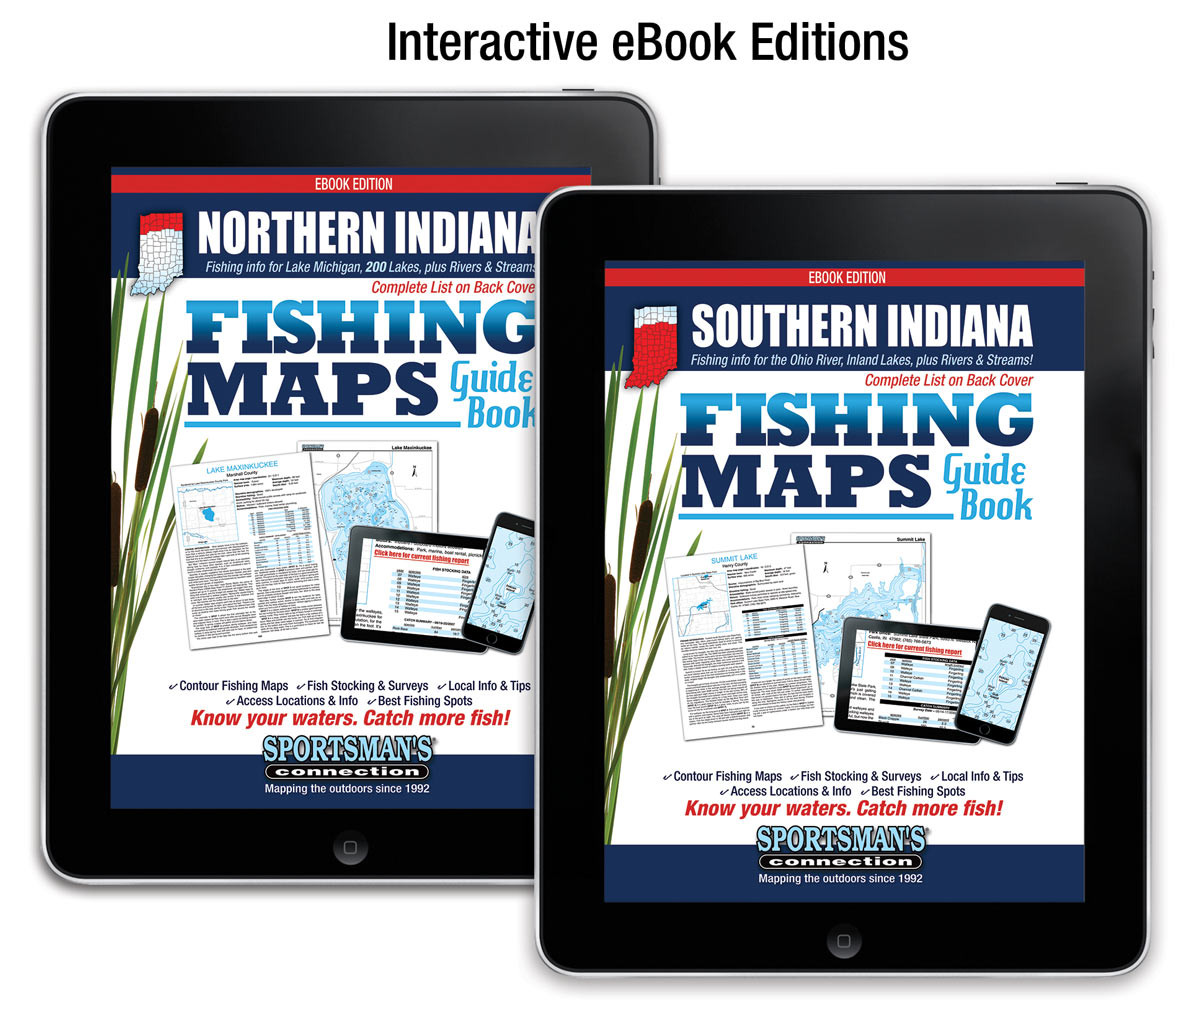 https://cdn10.bigcommerce.com/s-hdumb/products/19224/images/35573/Indiana-Fishing-Map-Guide-eBook-Covers__71978.1578148873.1280.1280.jpg?c=2